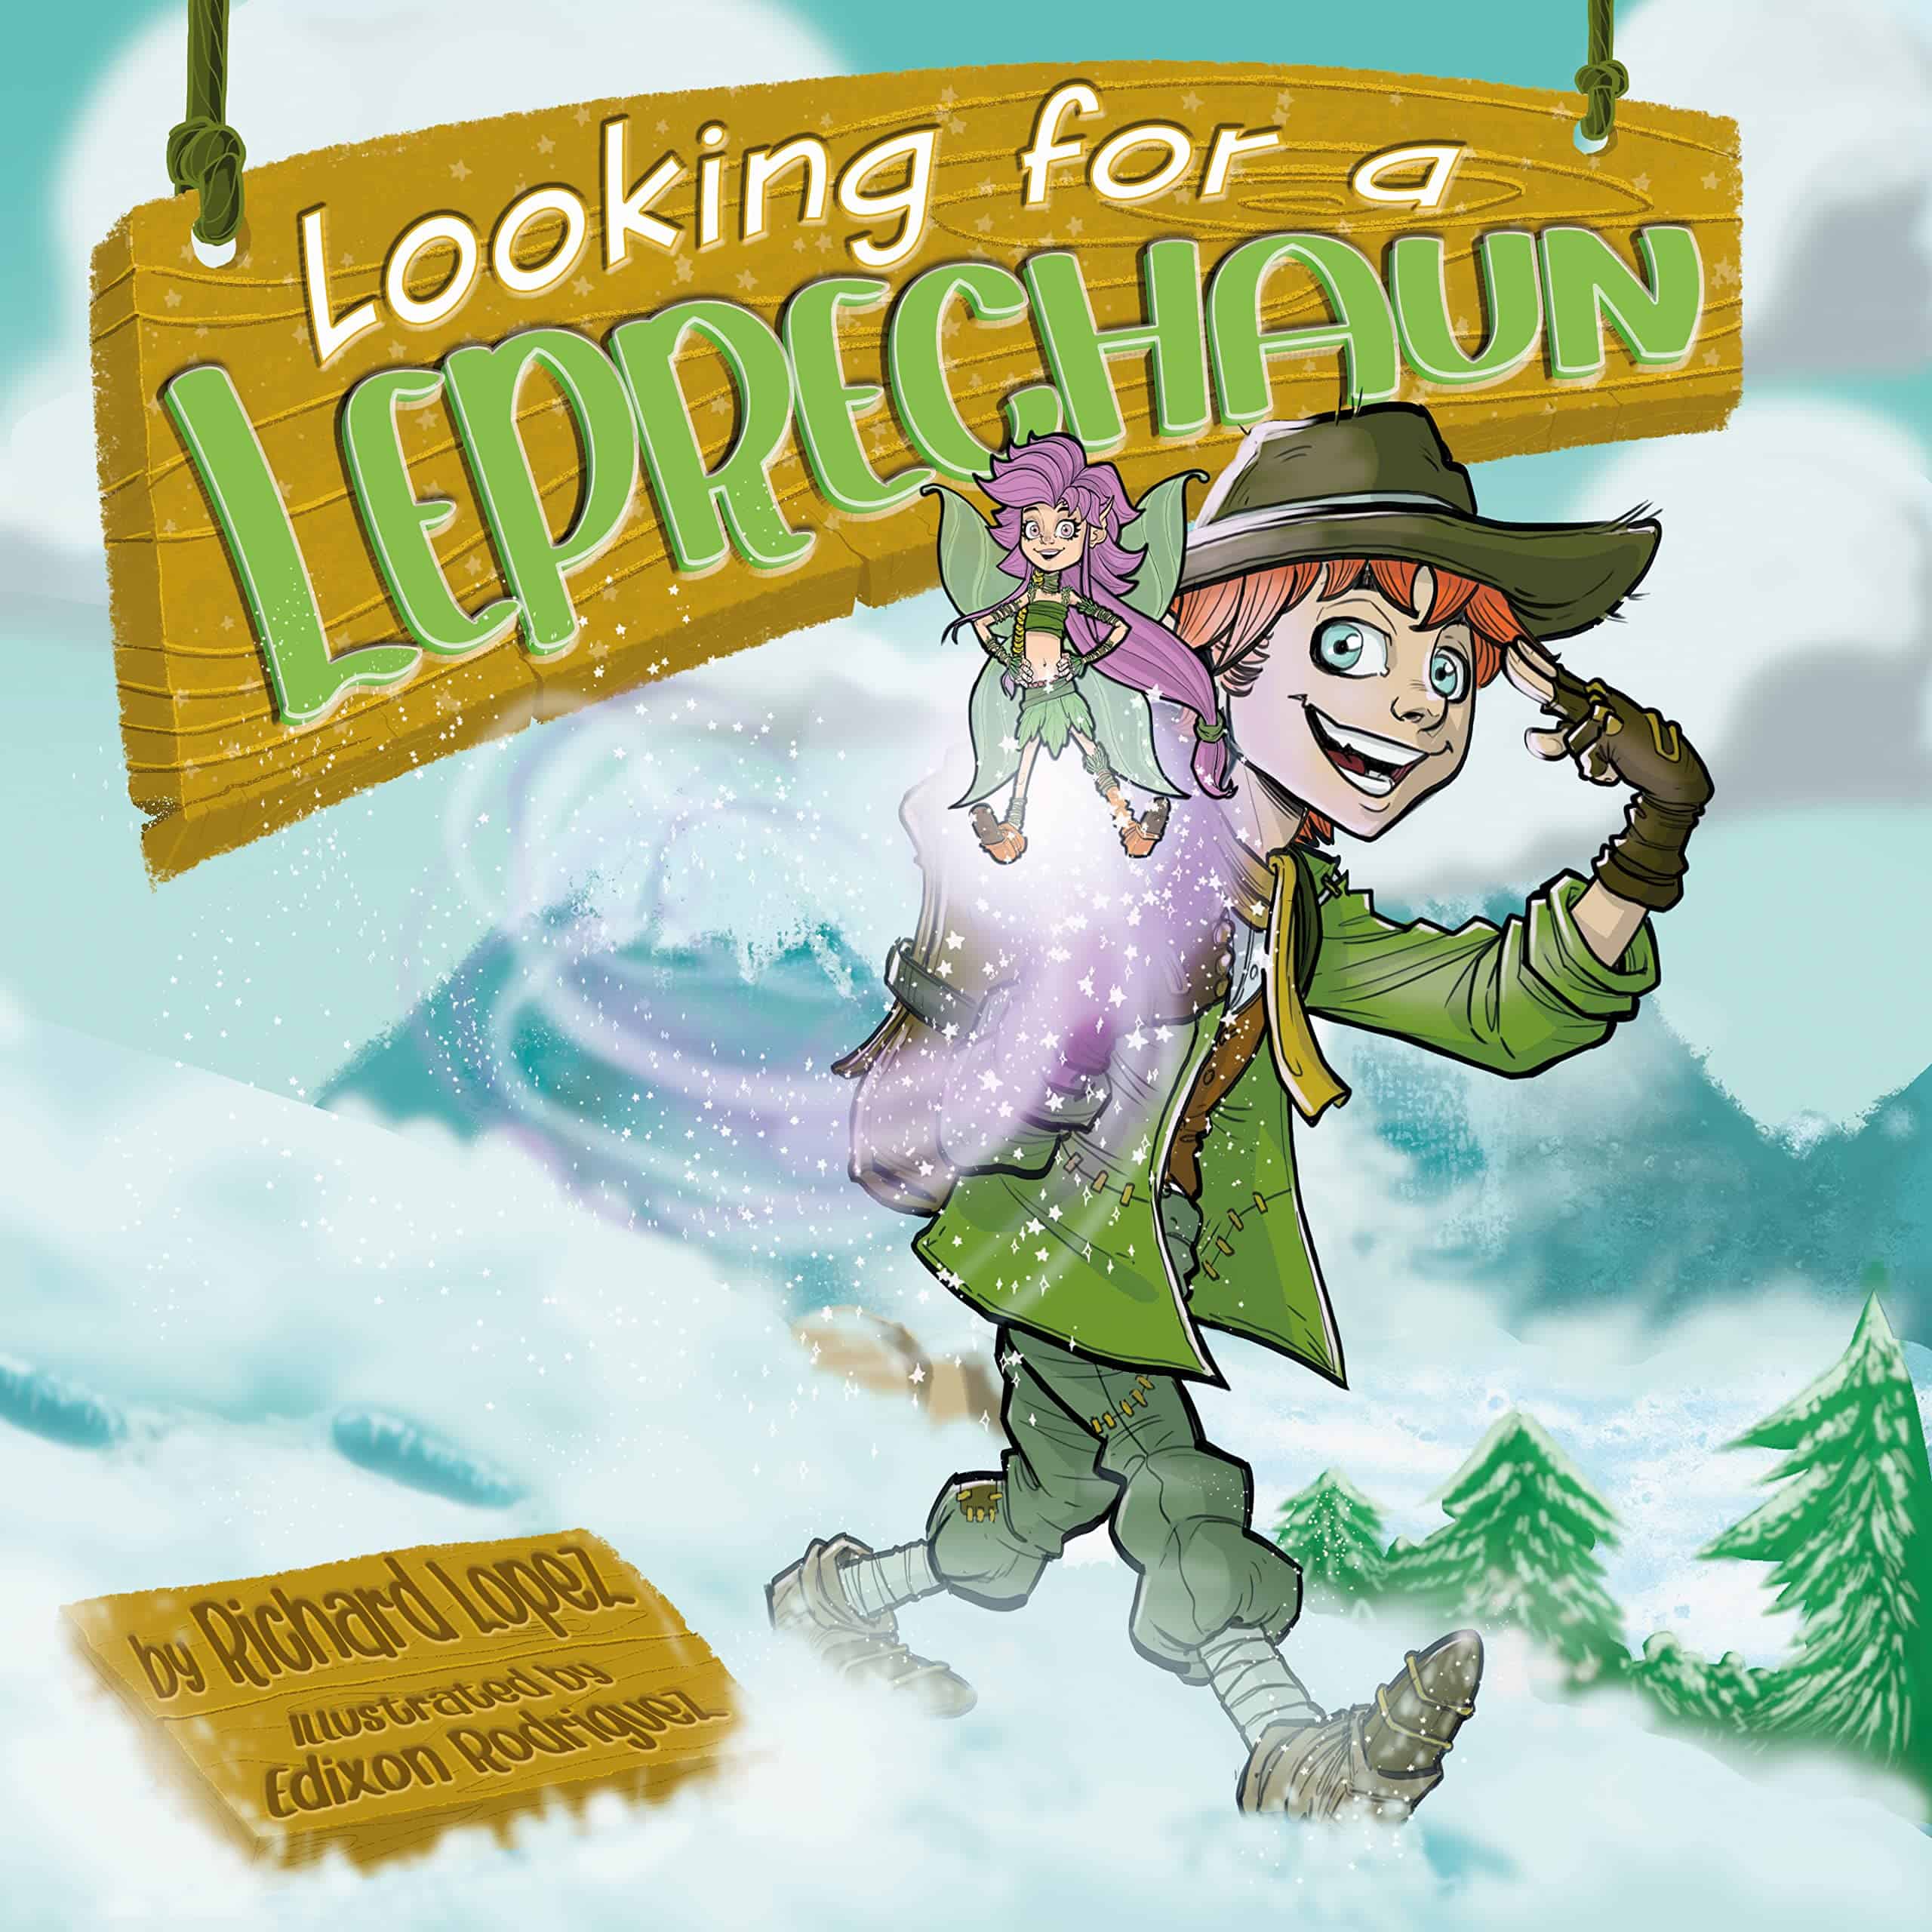 Looking for a Leprechaun by Richard Lopez